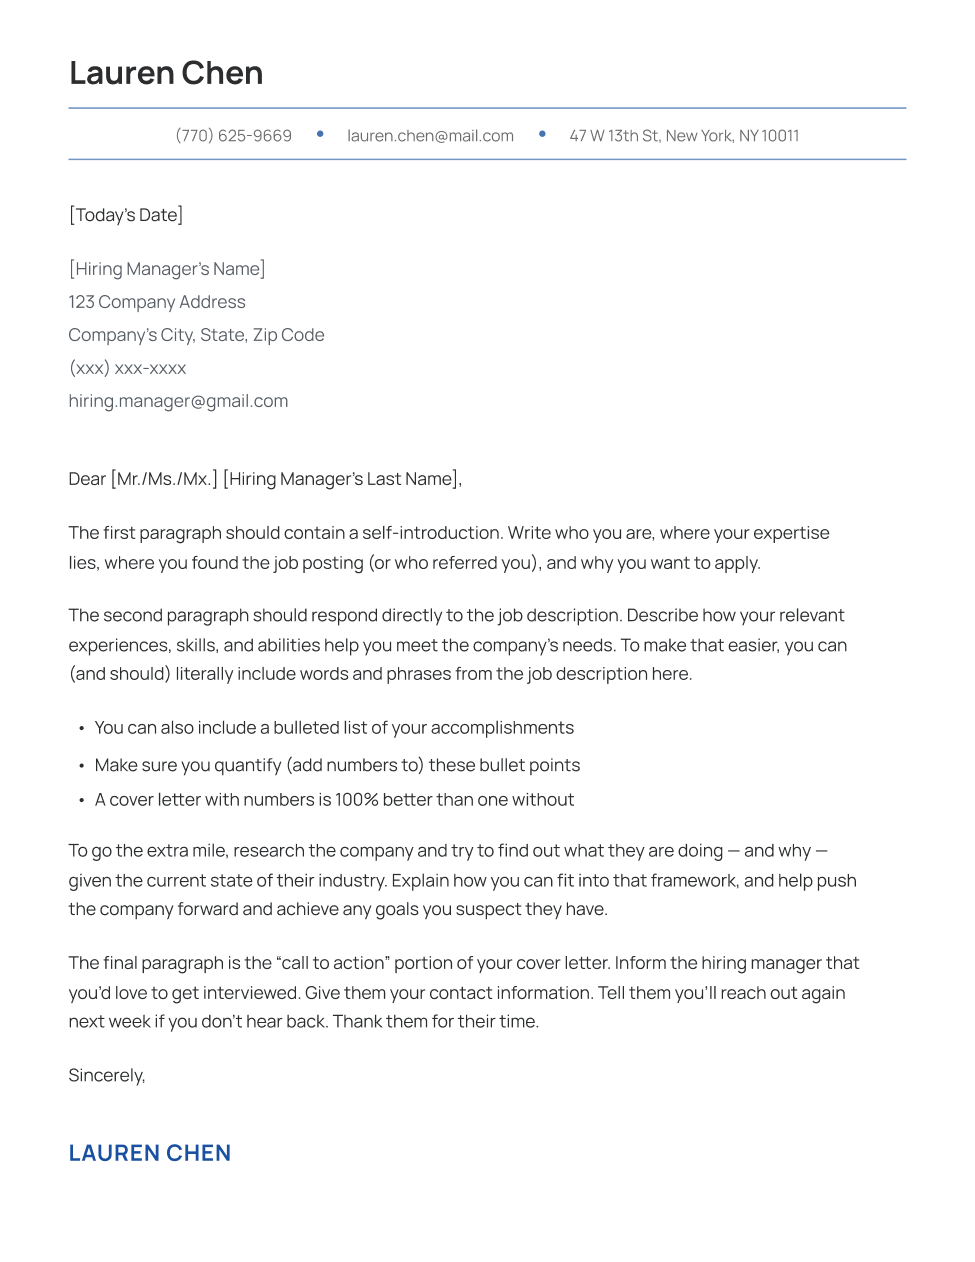 Modern cover letter template in navy blue, featuring a simple and clean design.